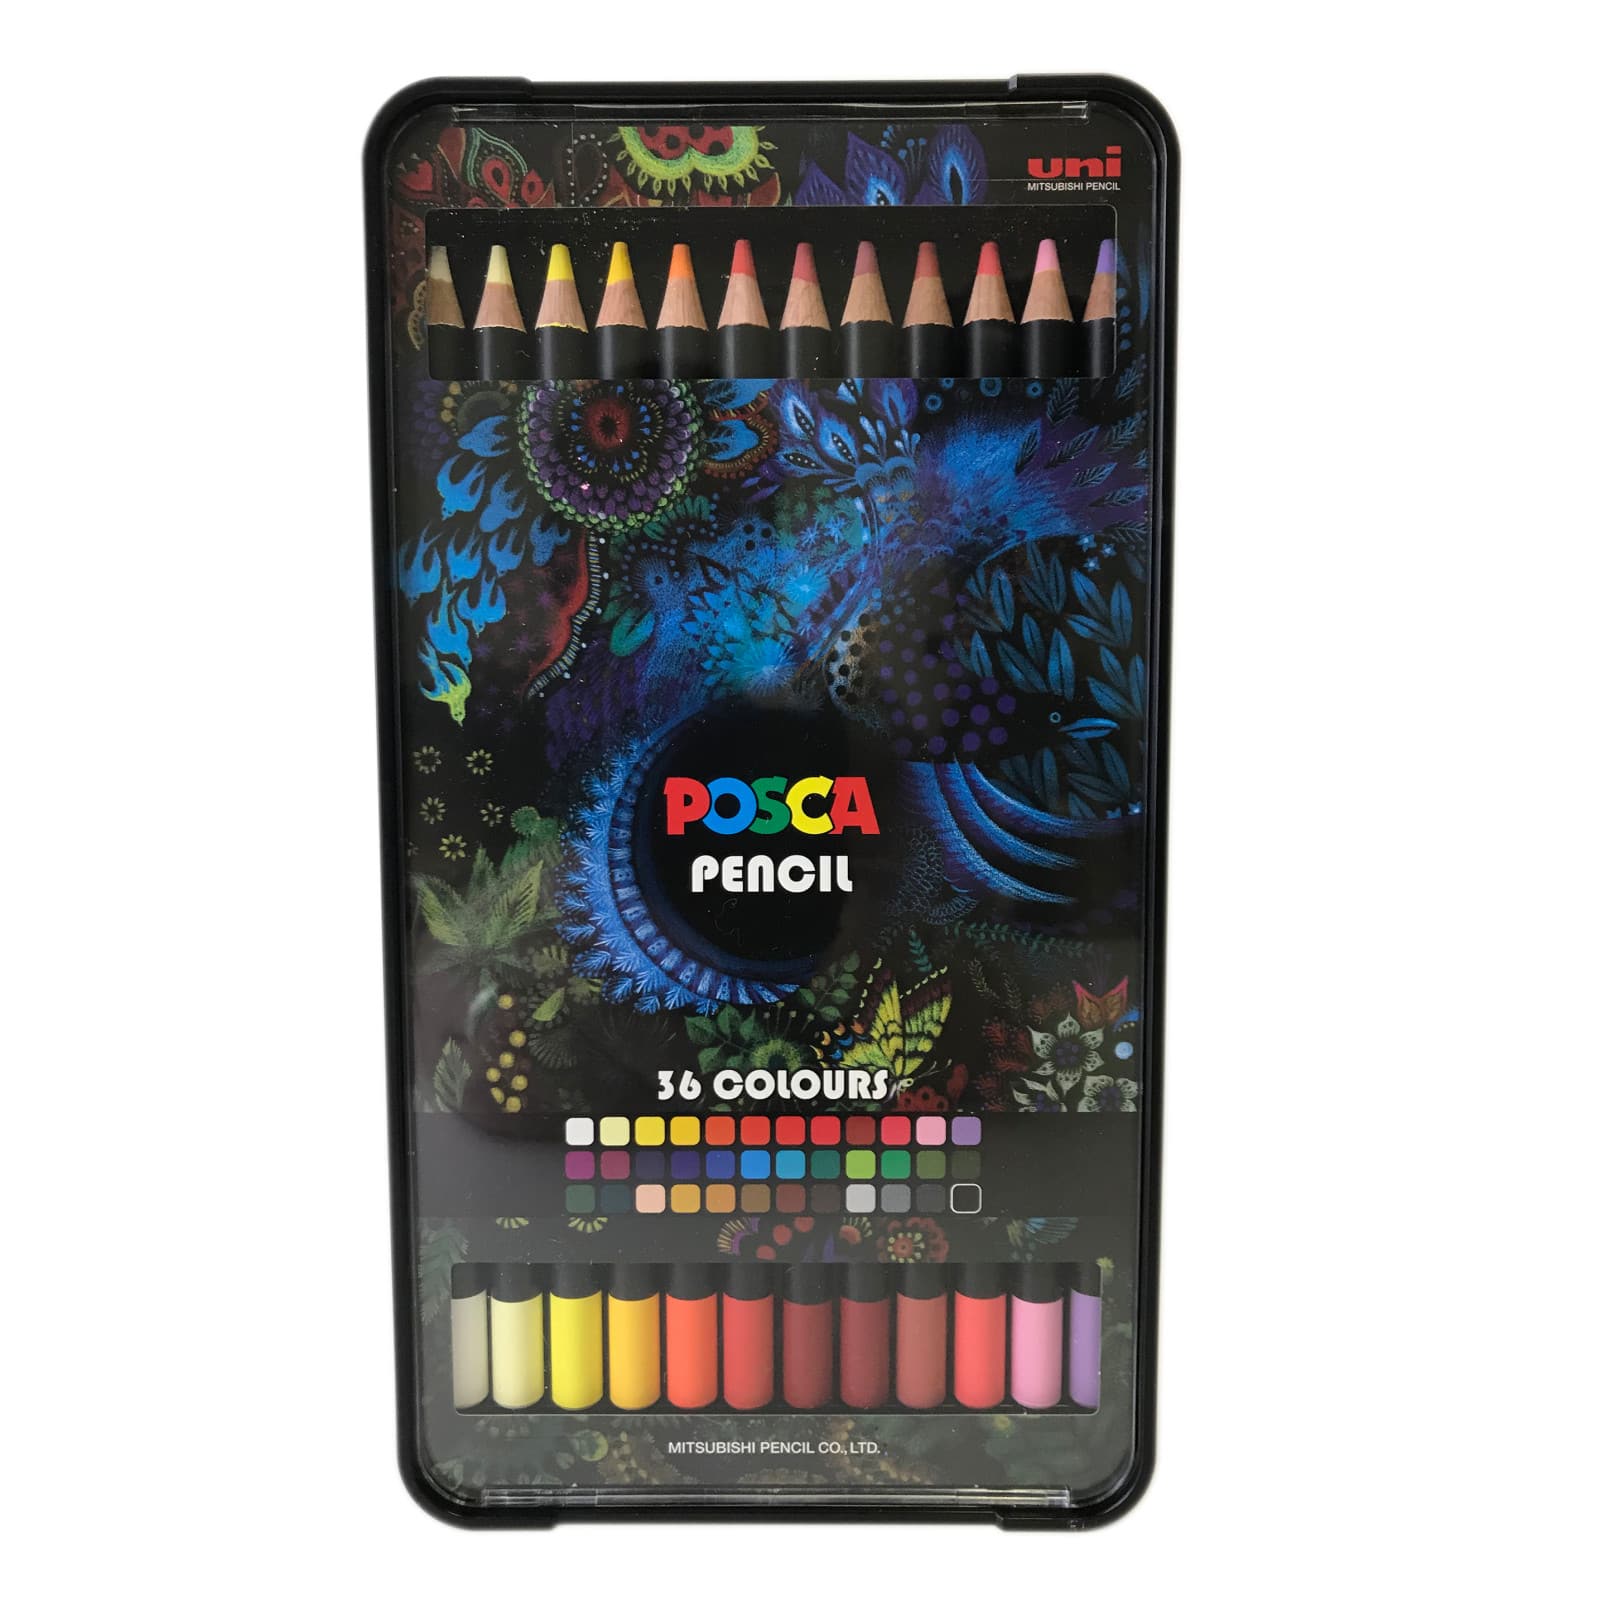 4 Packs: 36 ct. (144 total) POSCA Colored Pencils